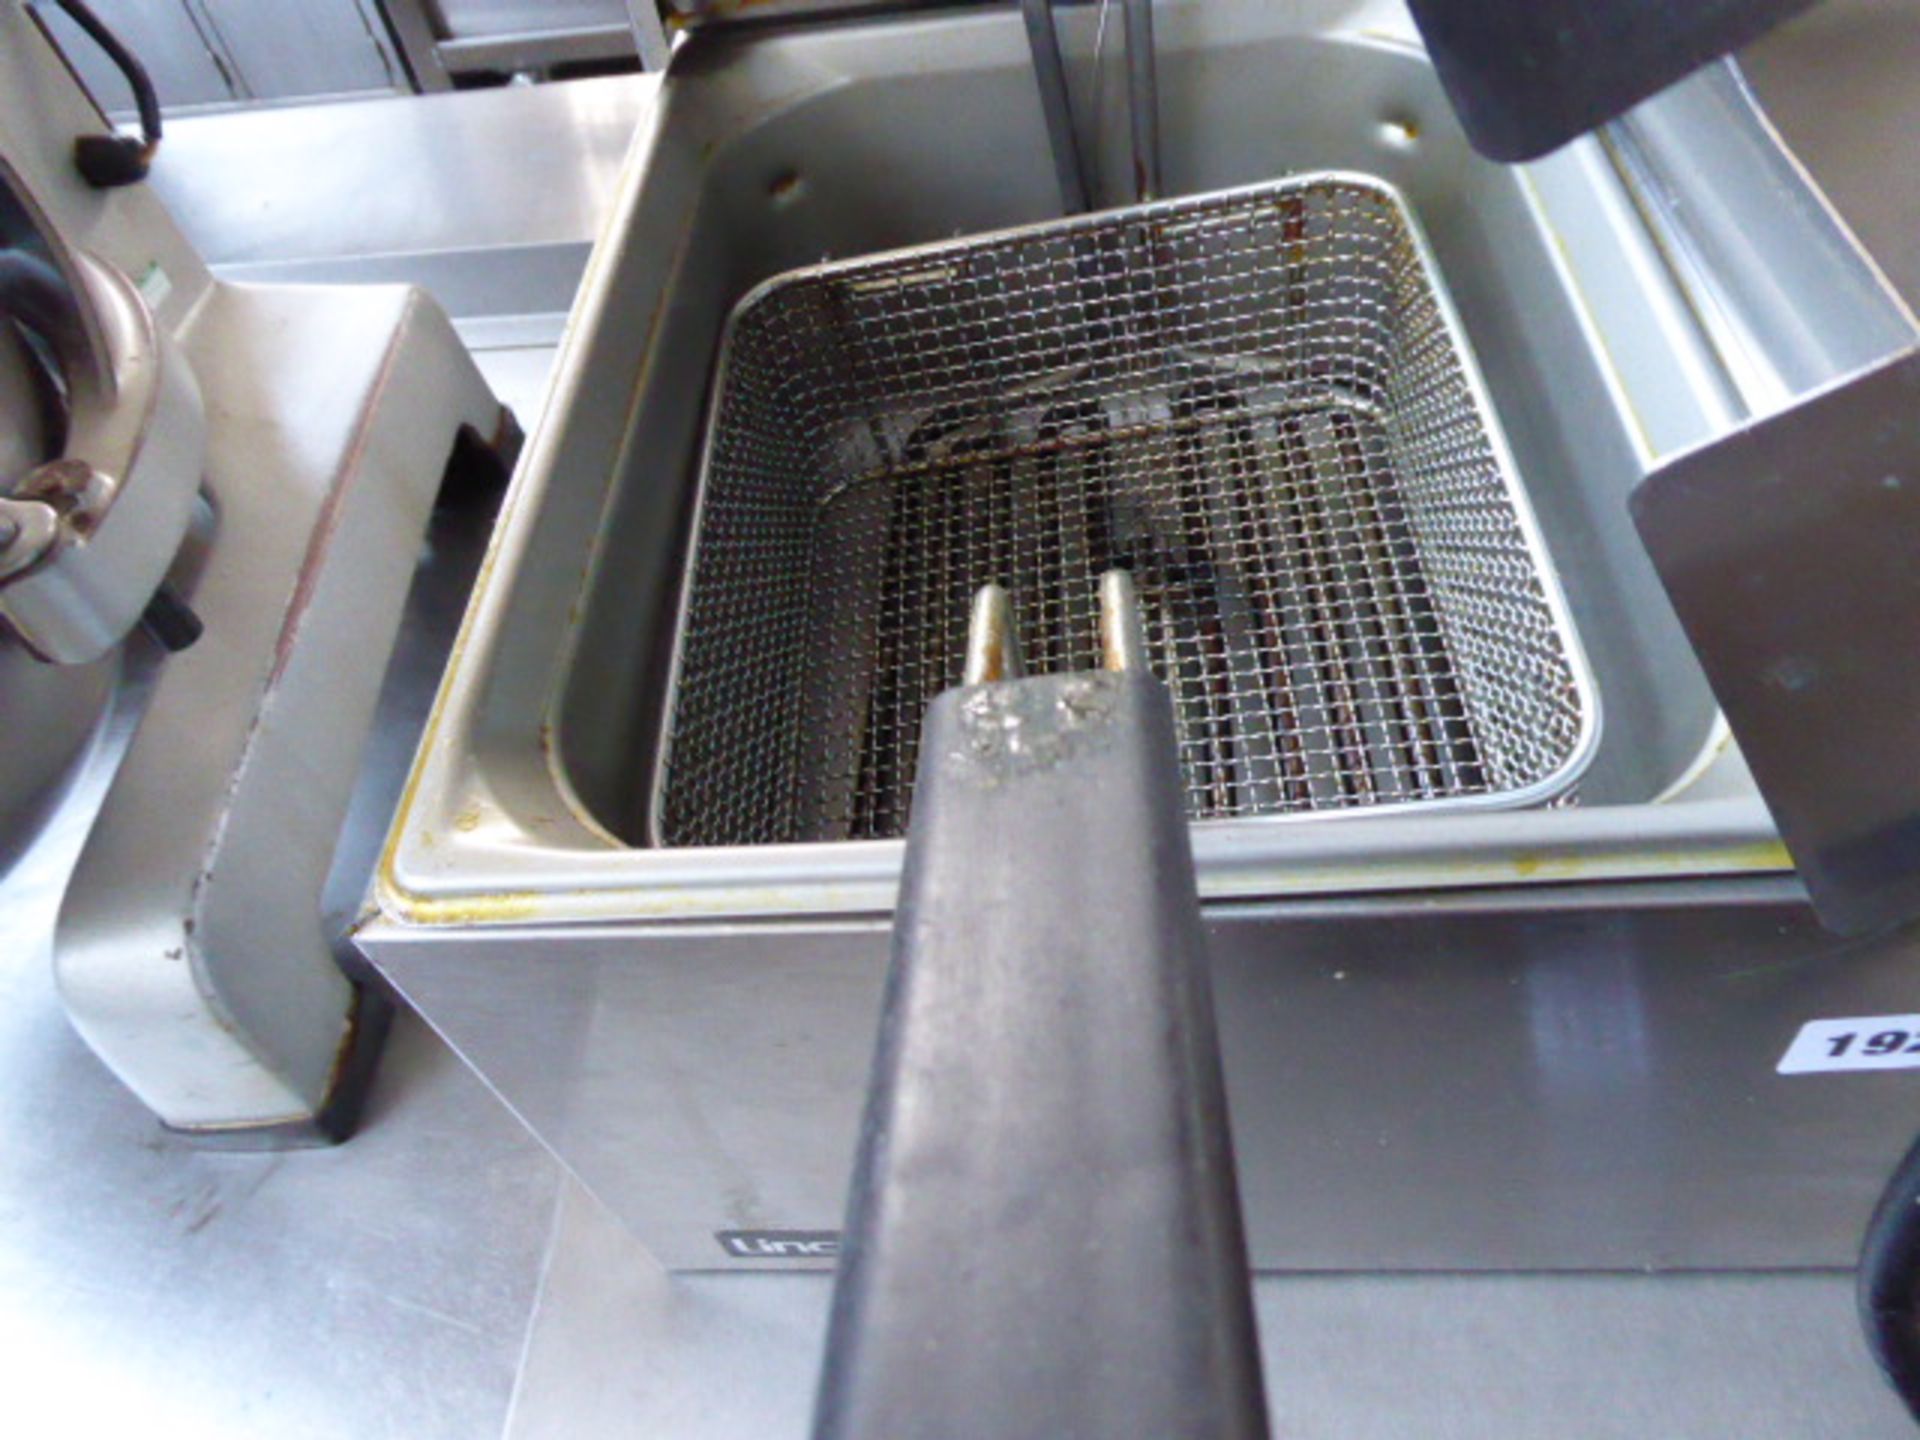 55cm electric Lincat bench top 2 well fryer with 2 baskets (failed test) - Image 2 of 2